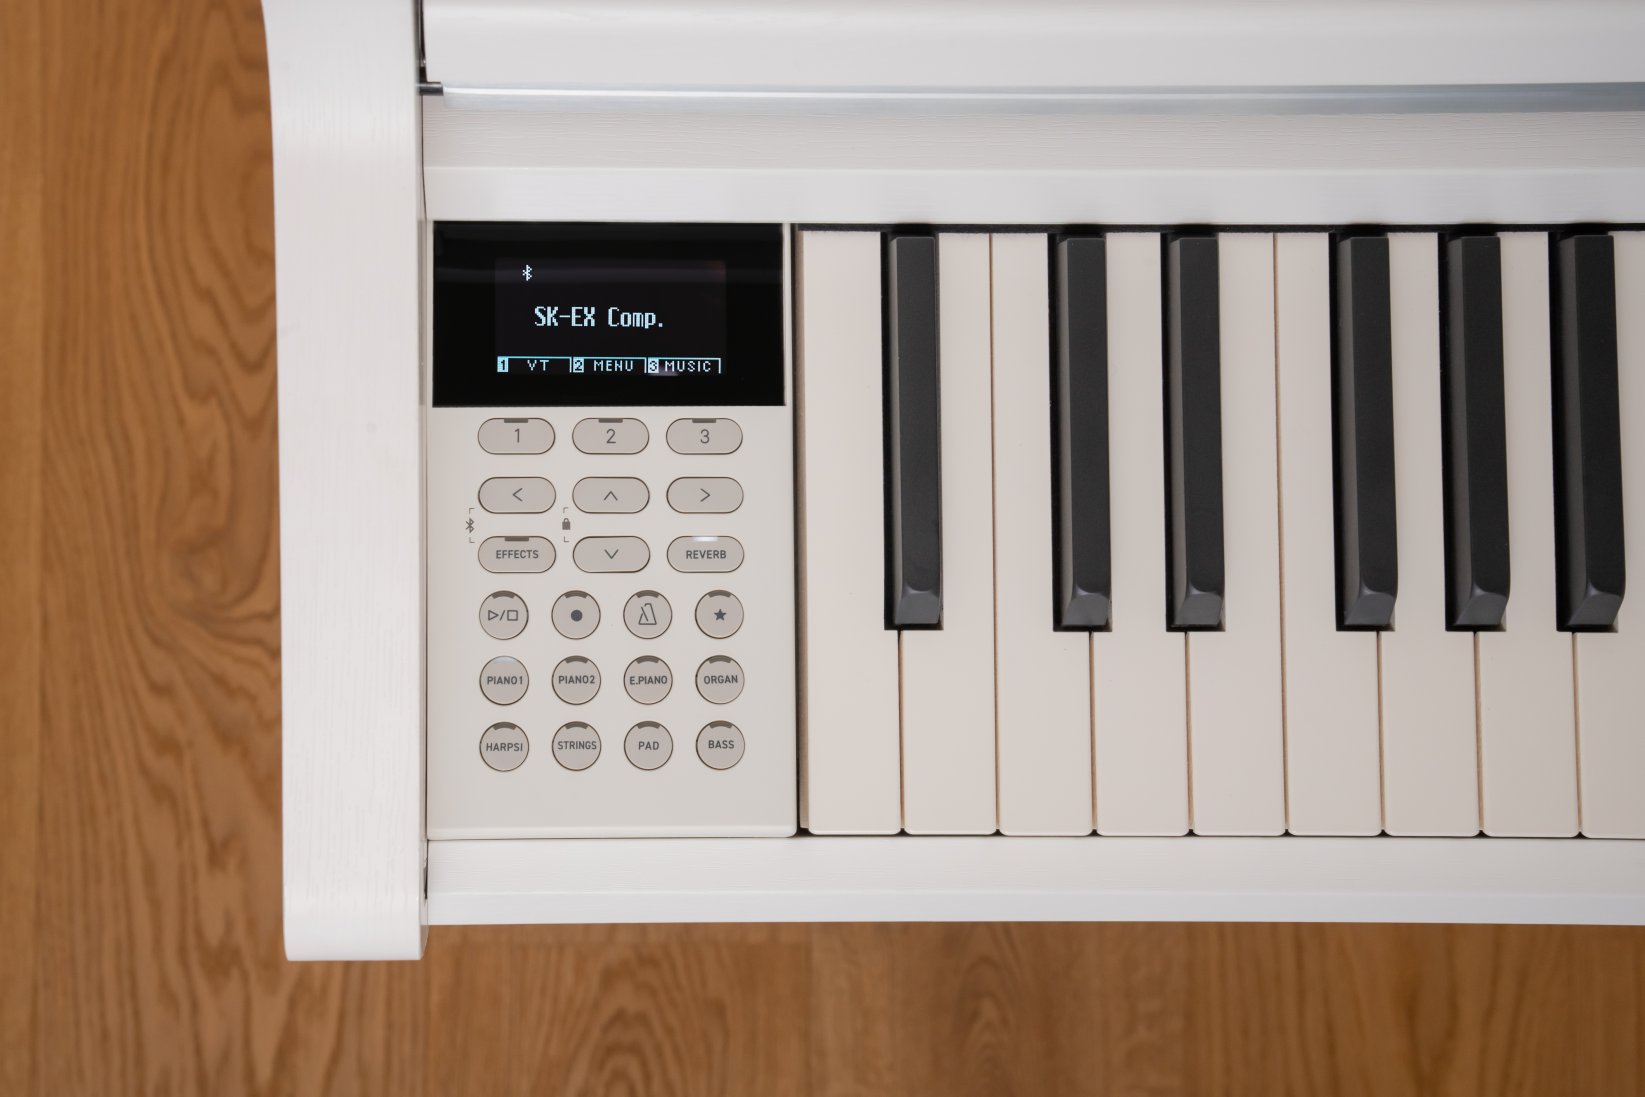 Kawai Concert Artist Home Digtial Pianos For Sale | Millers Music